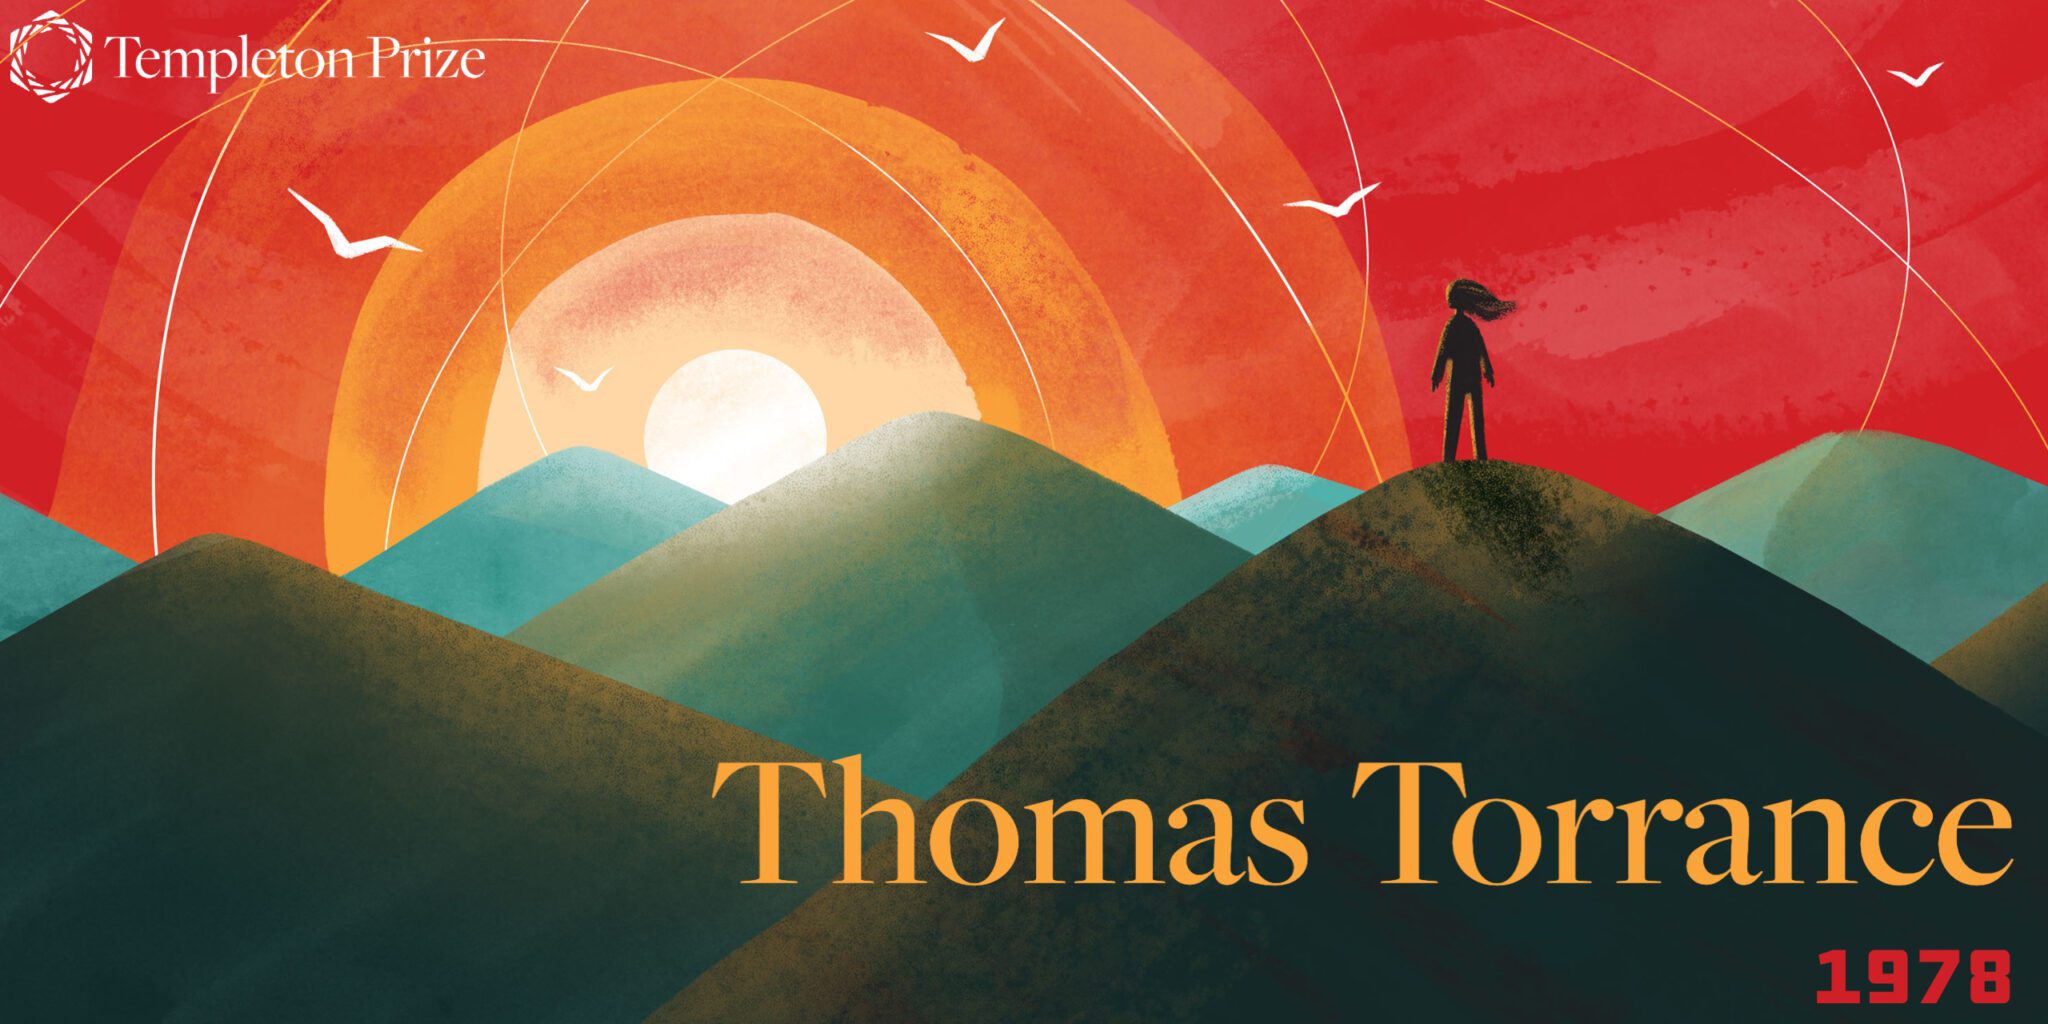 Thomas Torrance’s Insight on the Rationality of the Universe